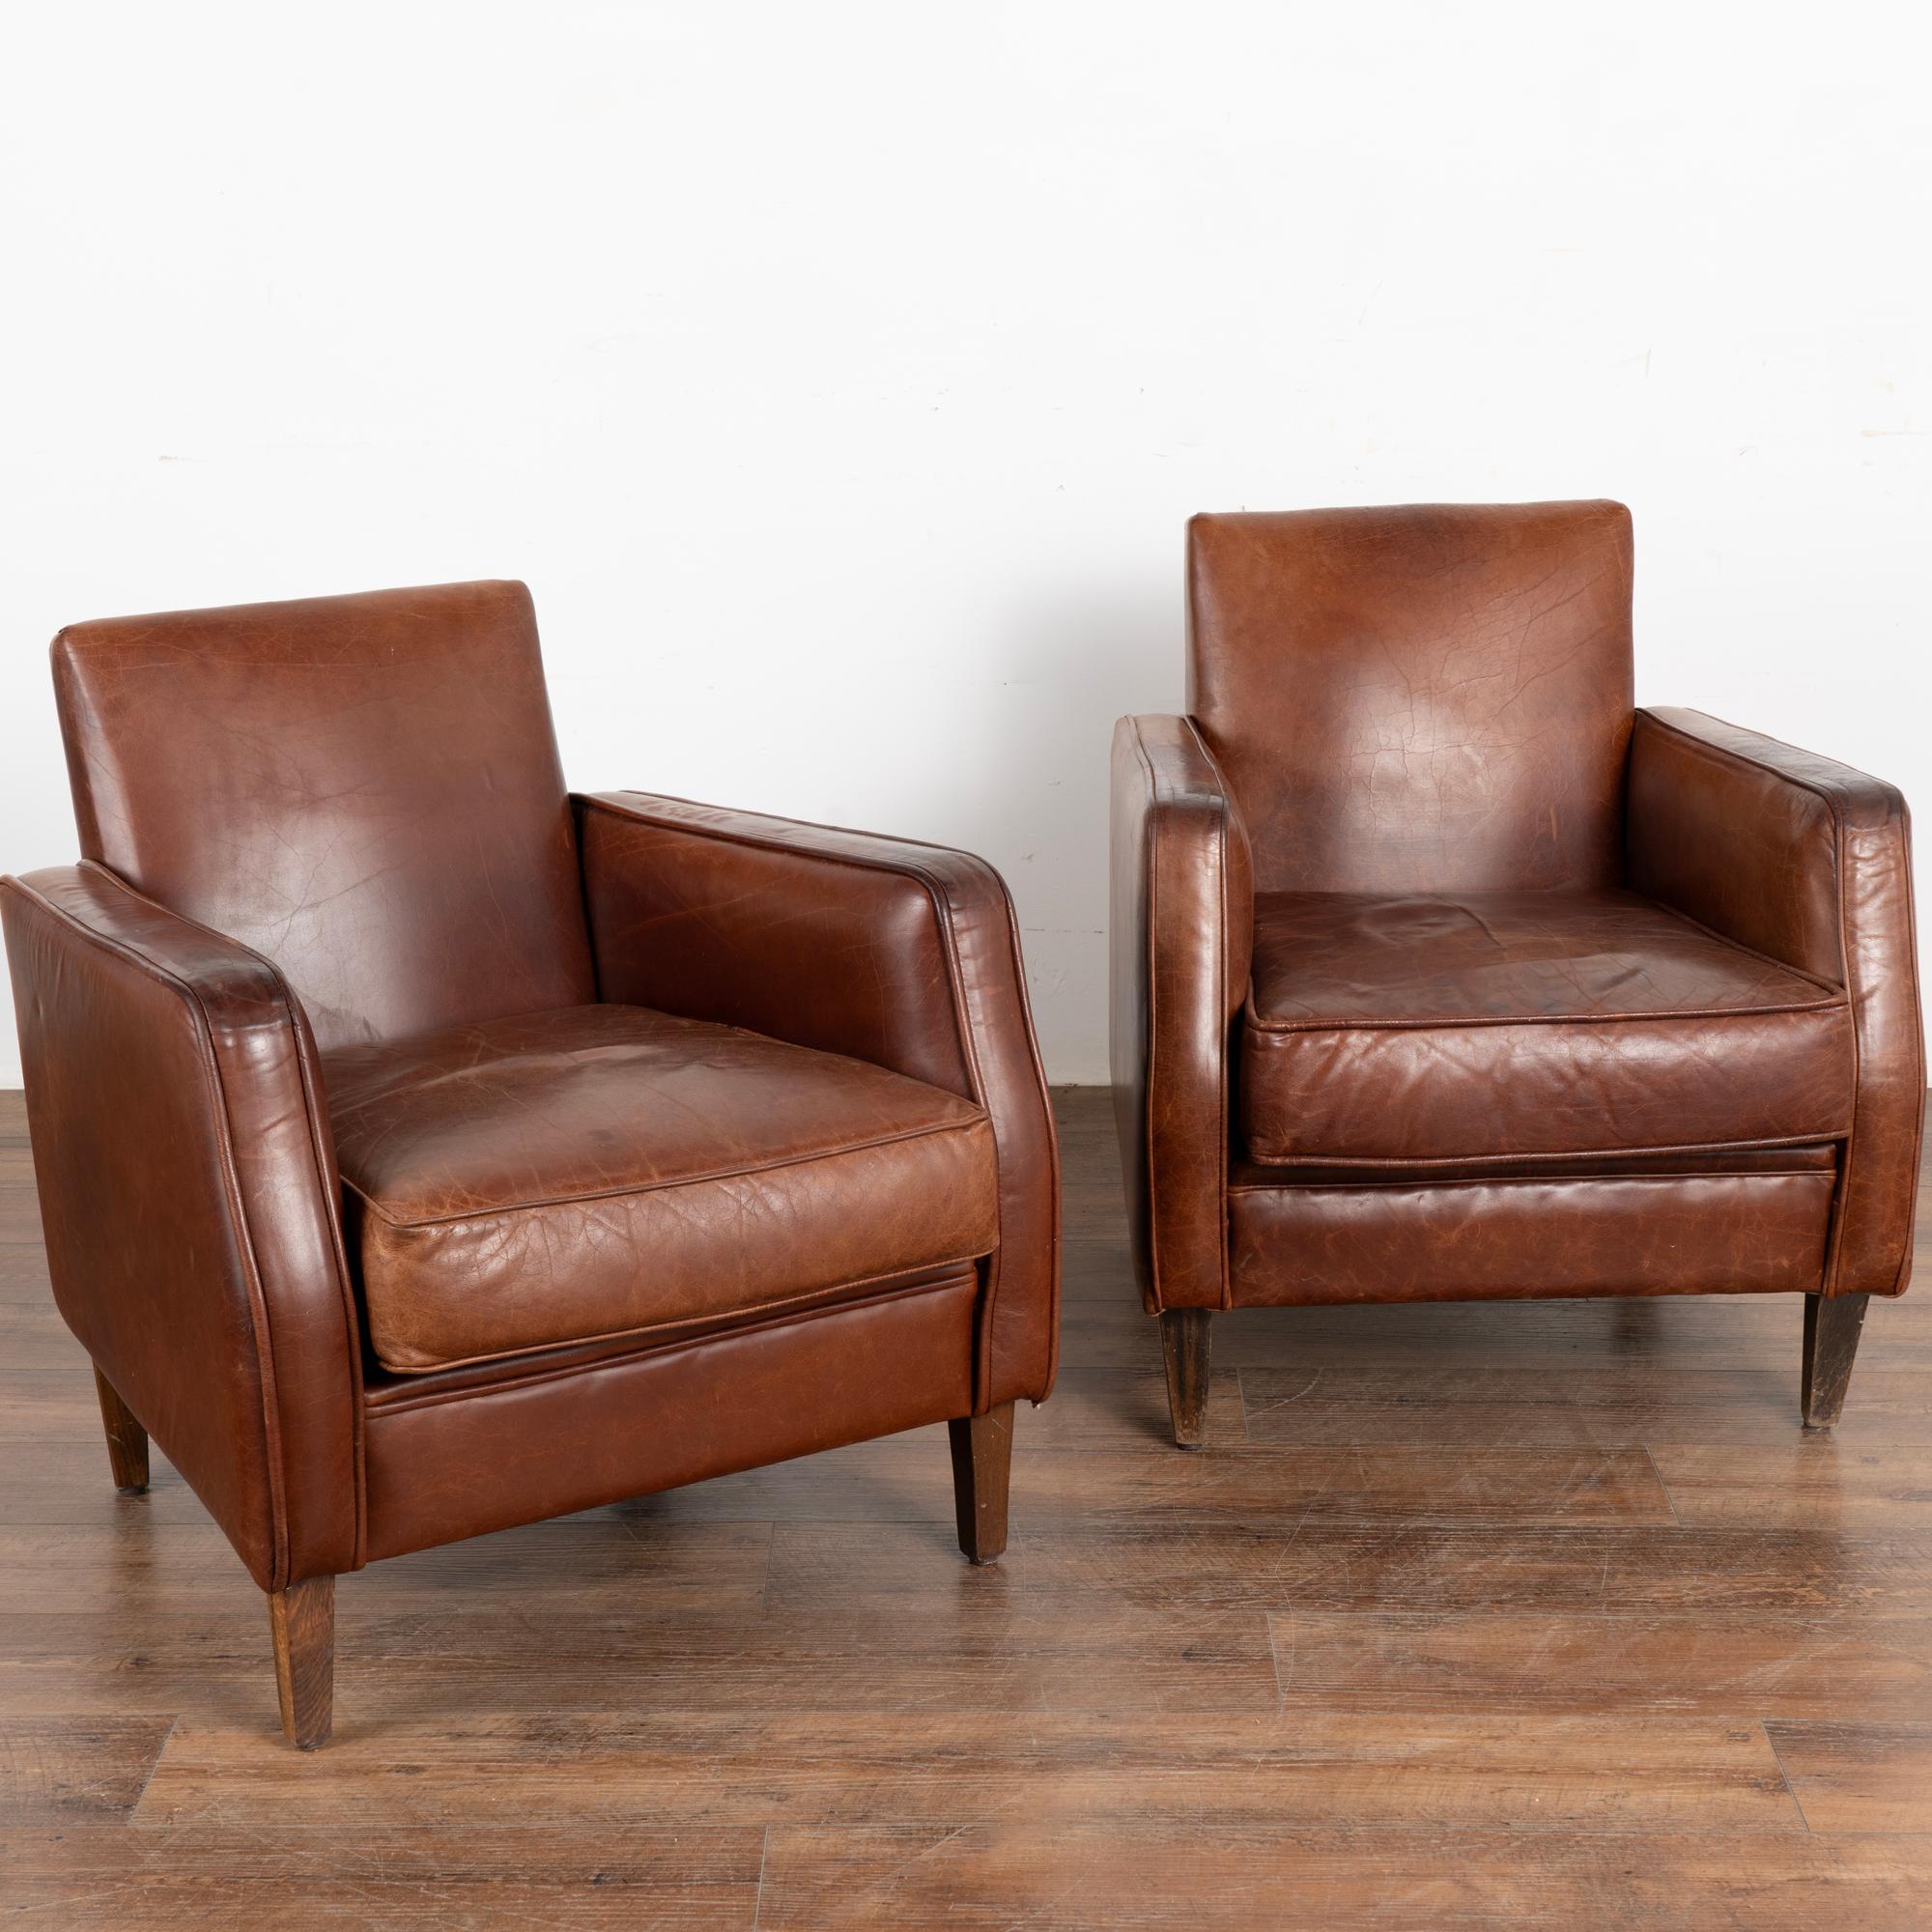 Pair, brown leather club arm chairs with hard wood legs.
Upholstered in vintage brown leather with rich patina and streamlined arms, decorative nail heads along back.
Sold in original vintage condition; solid/stable and sits comfortably. Typical age